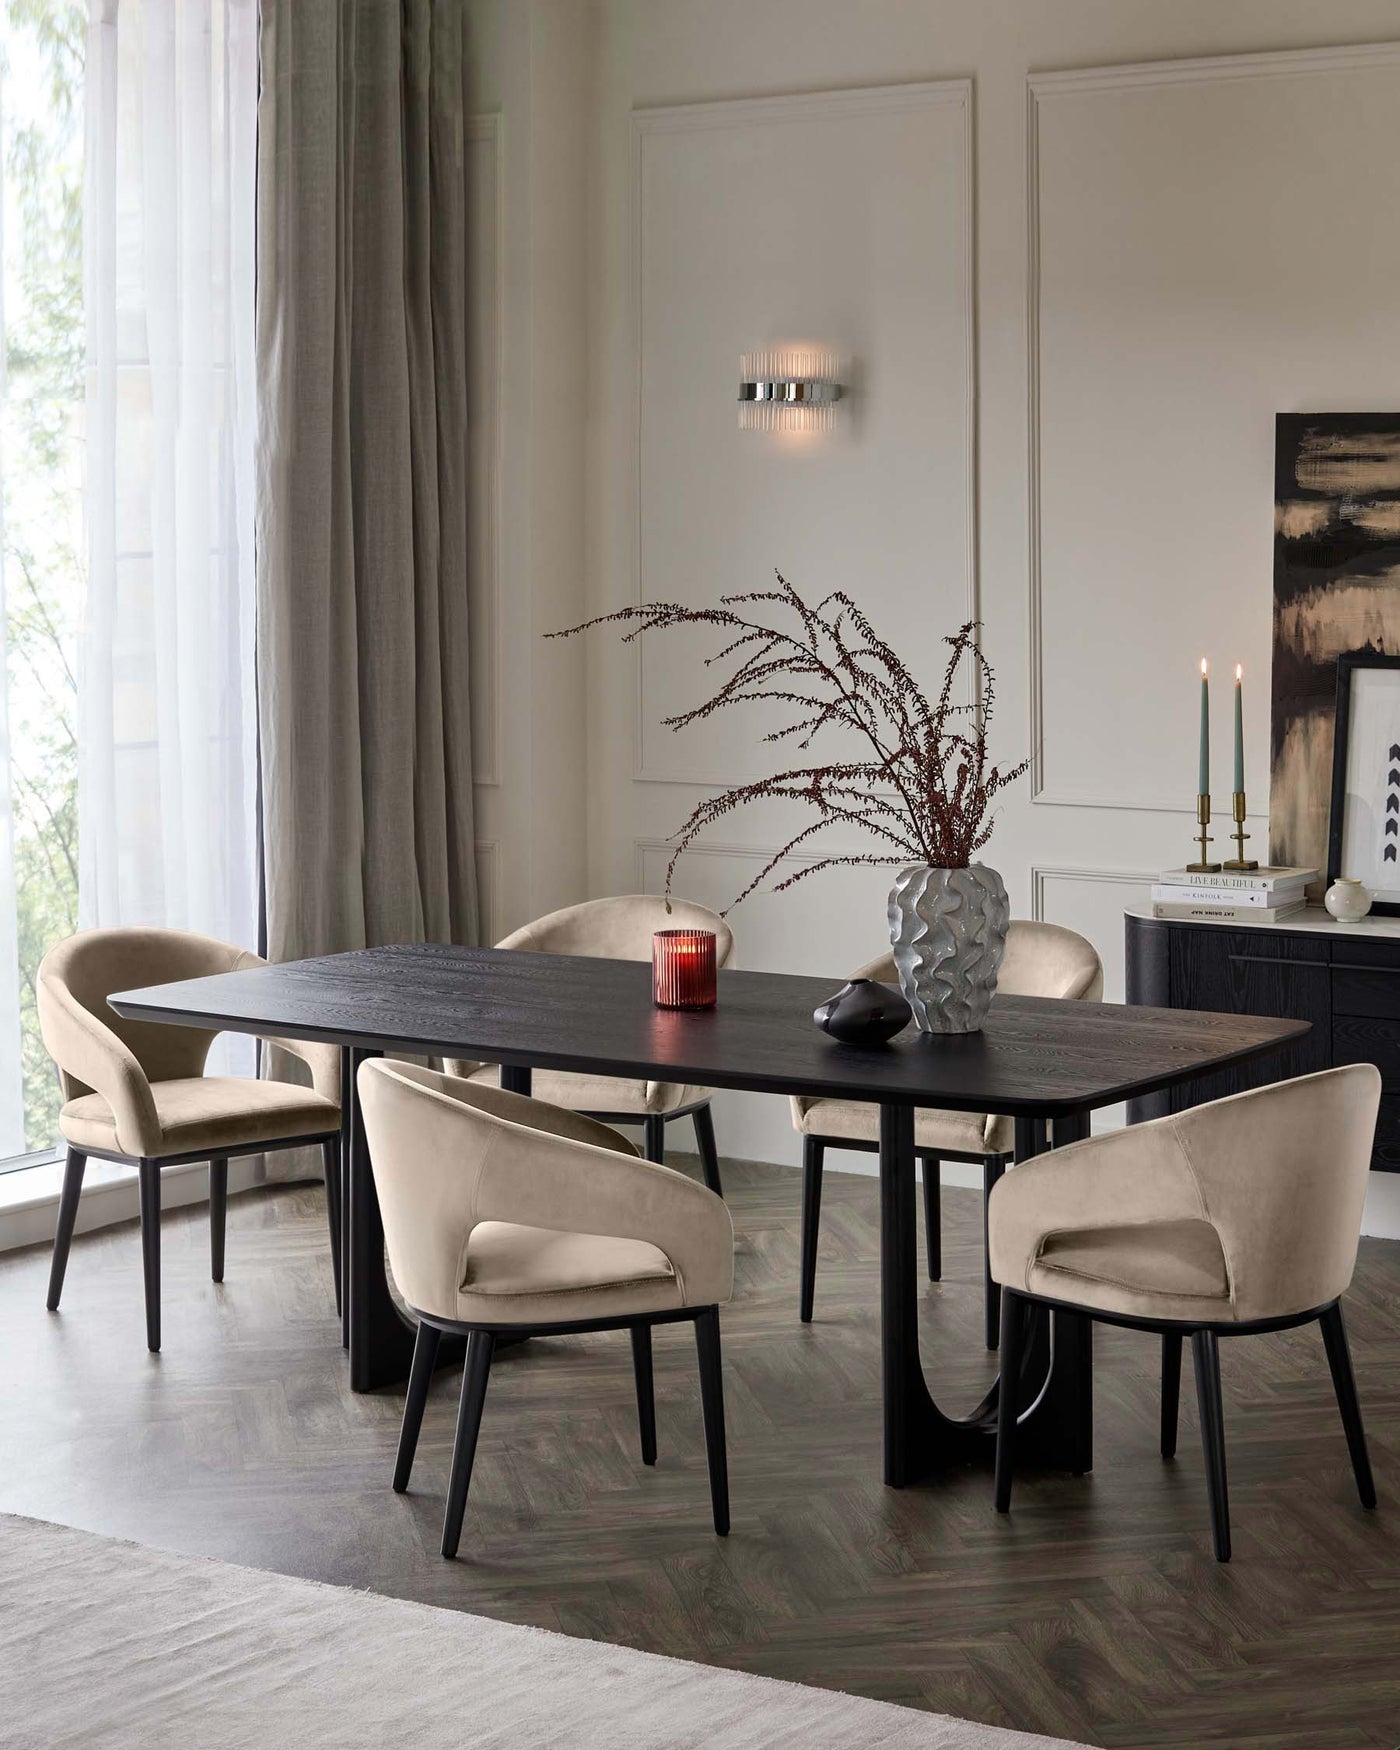 Elegant dining room with a modern, rectangular black wooden table and four plush beige upholstered chairs with dark wooden legs. The table is adorned with a decorative vase and candle holders. The setting is on a textured grey area rug over a herringbone-patterned floor.